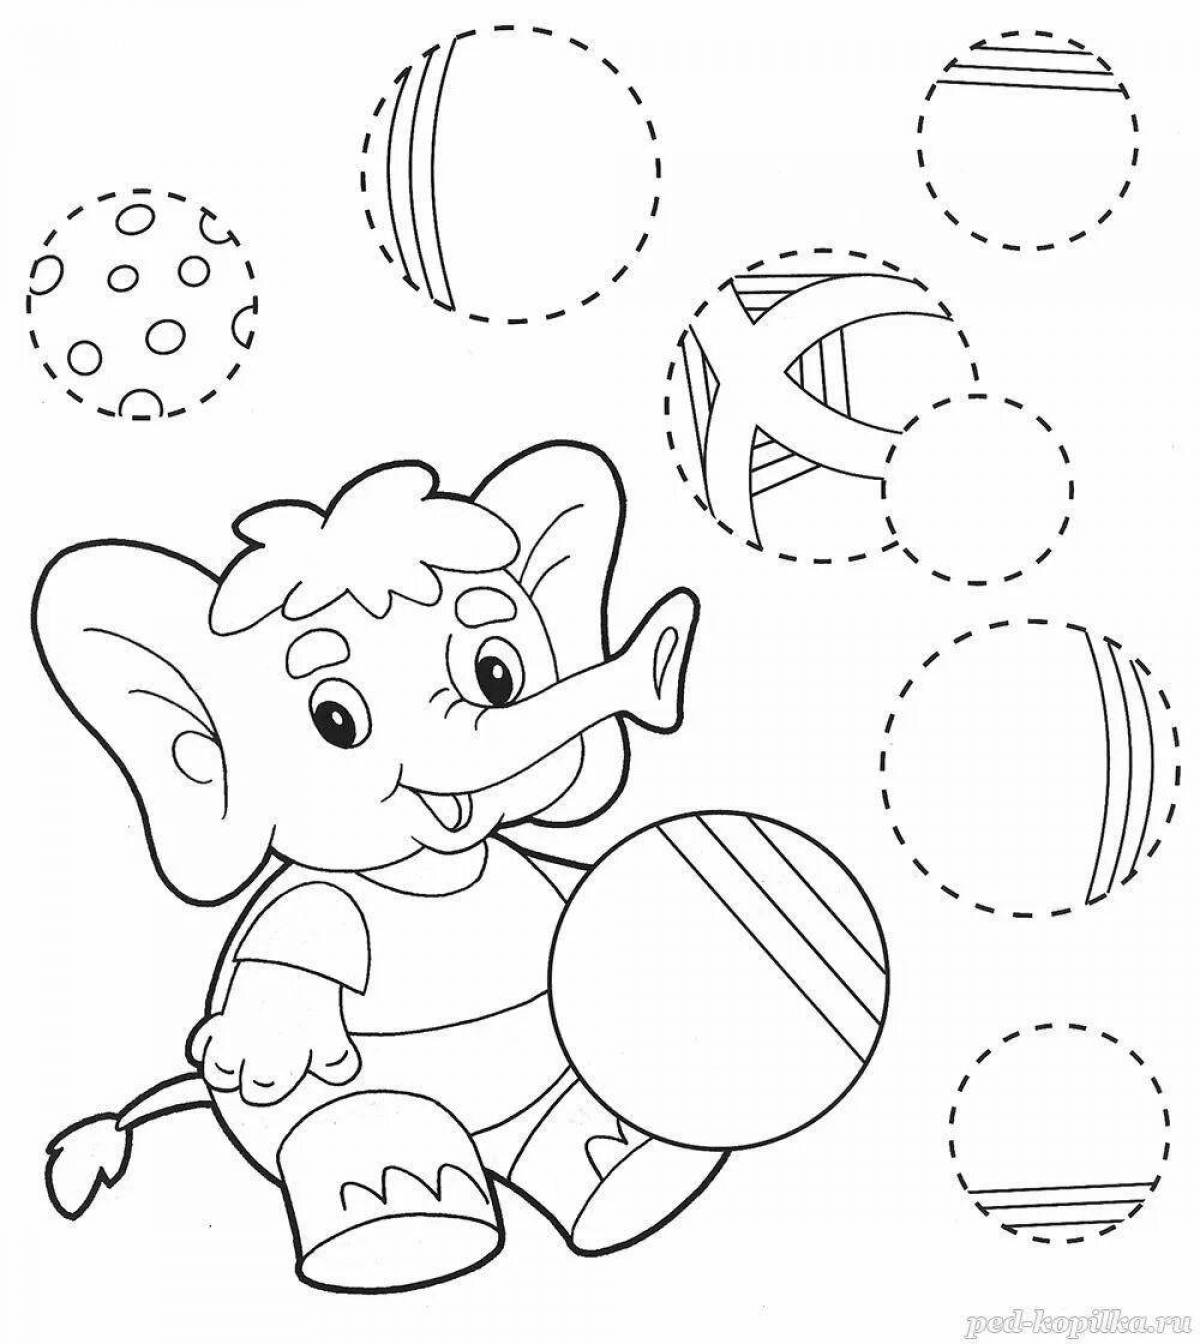 Great hatching coloring page